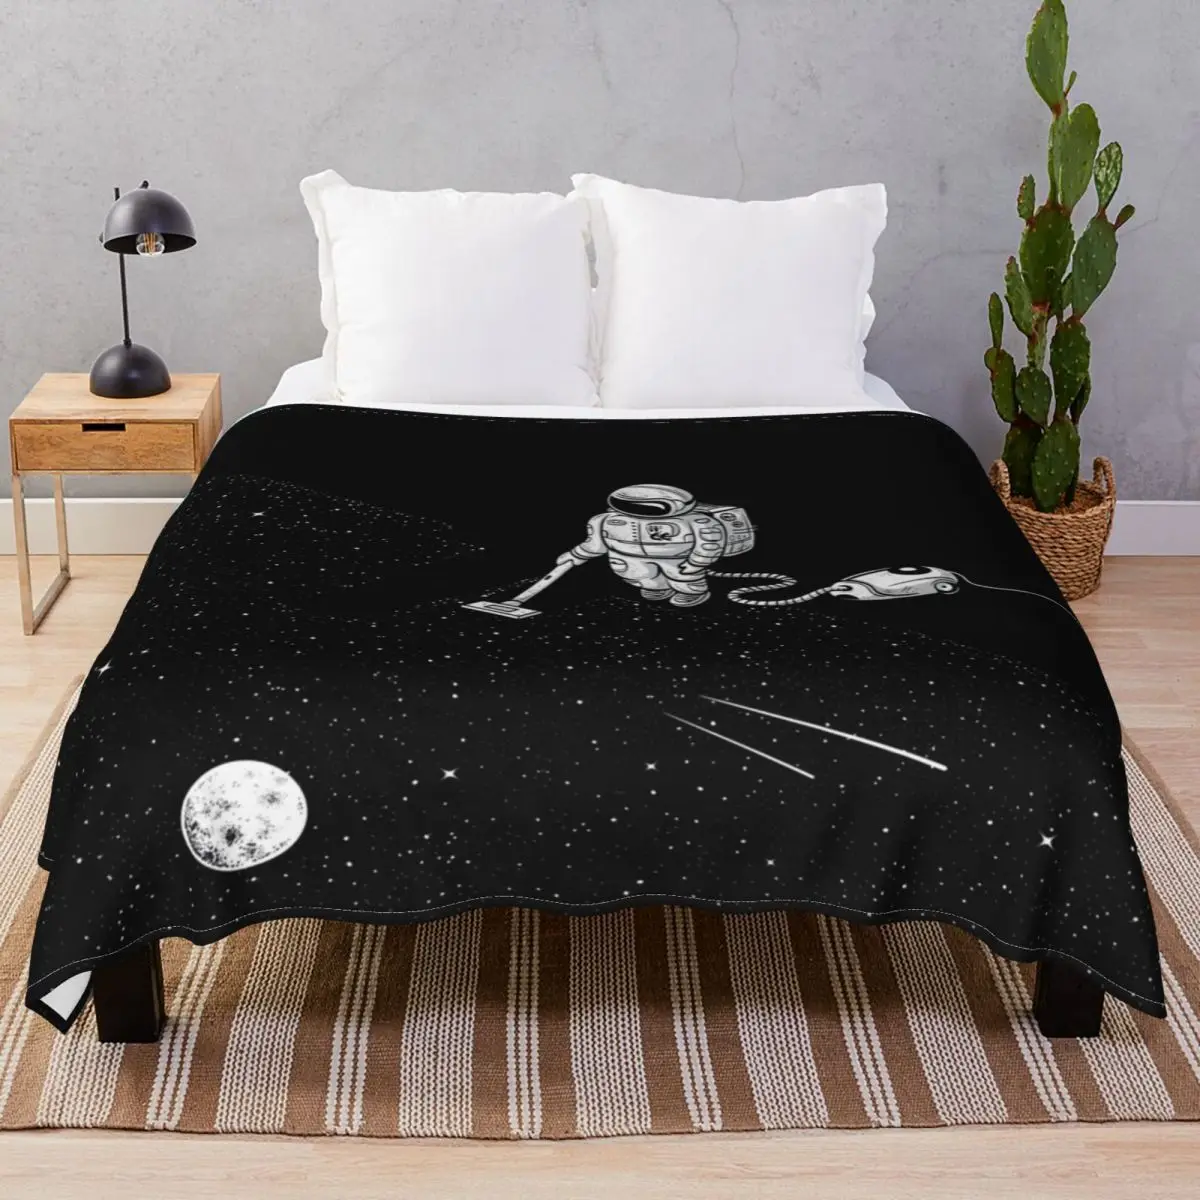 Space Cleaner Blankets Flannel All Season Comfortable Throw Blanket for Bedding Home Couch Travel Office